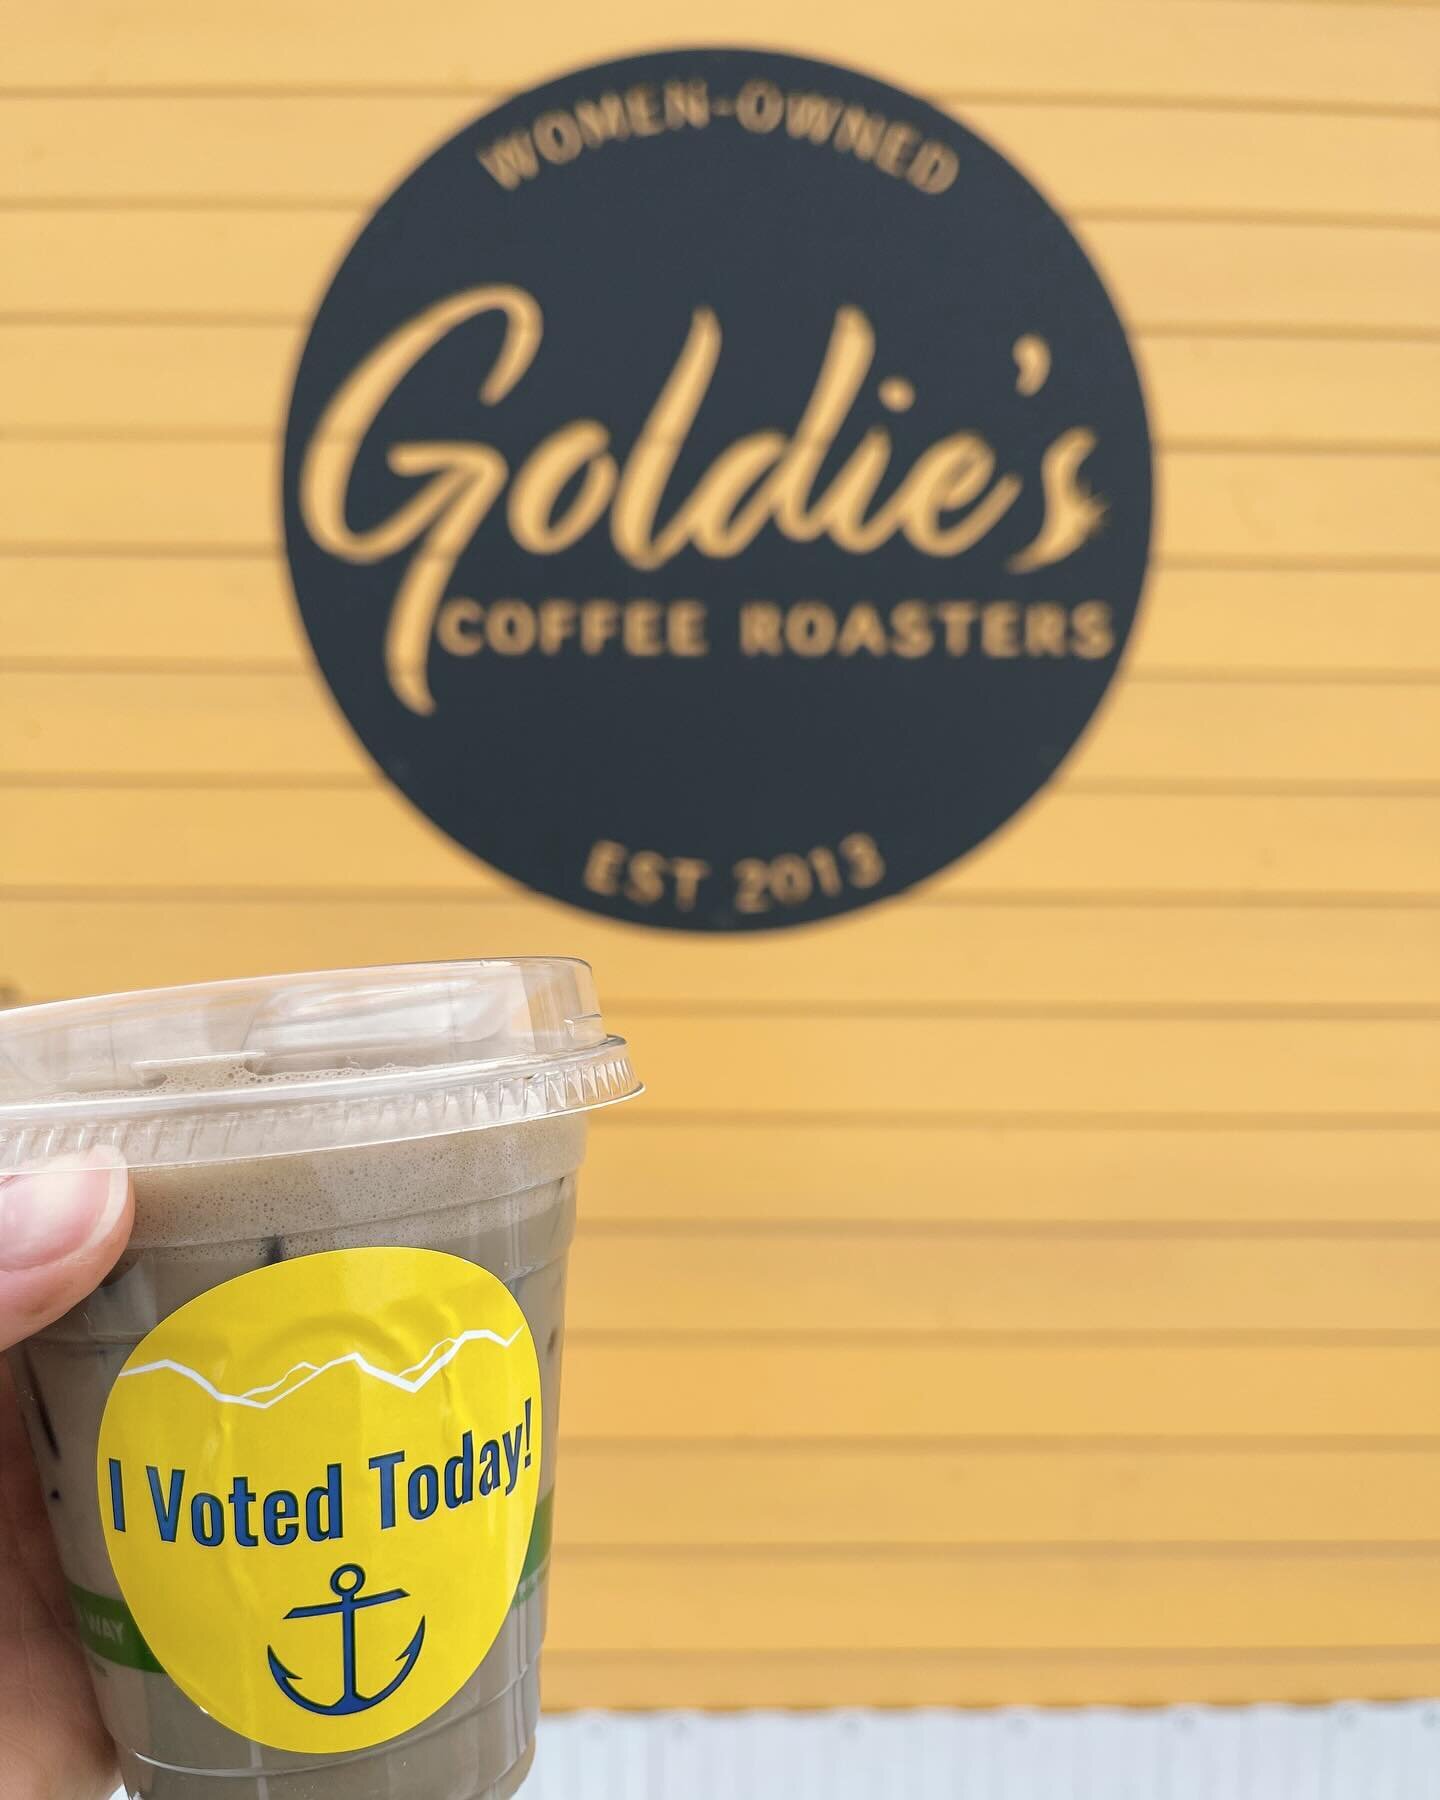 Tuesday vibes paired with an iced roasted matcha 🗳️🍃🇺🇸 #alaska #vote #anchorage #local #alaska #goldiescoffeeroasters